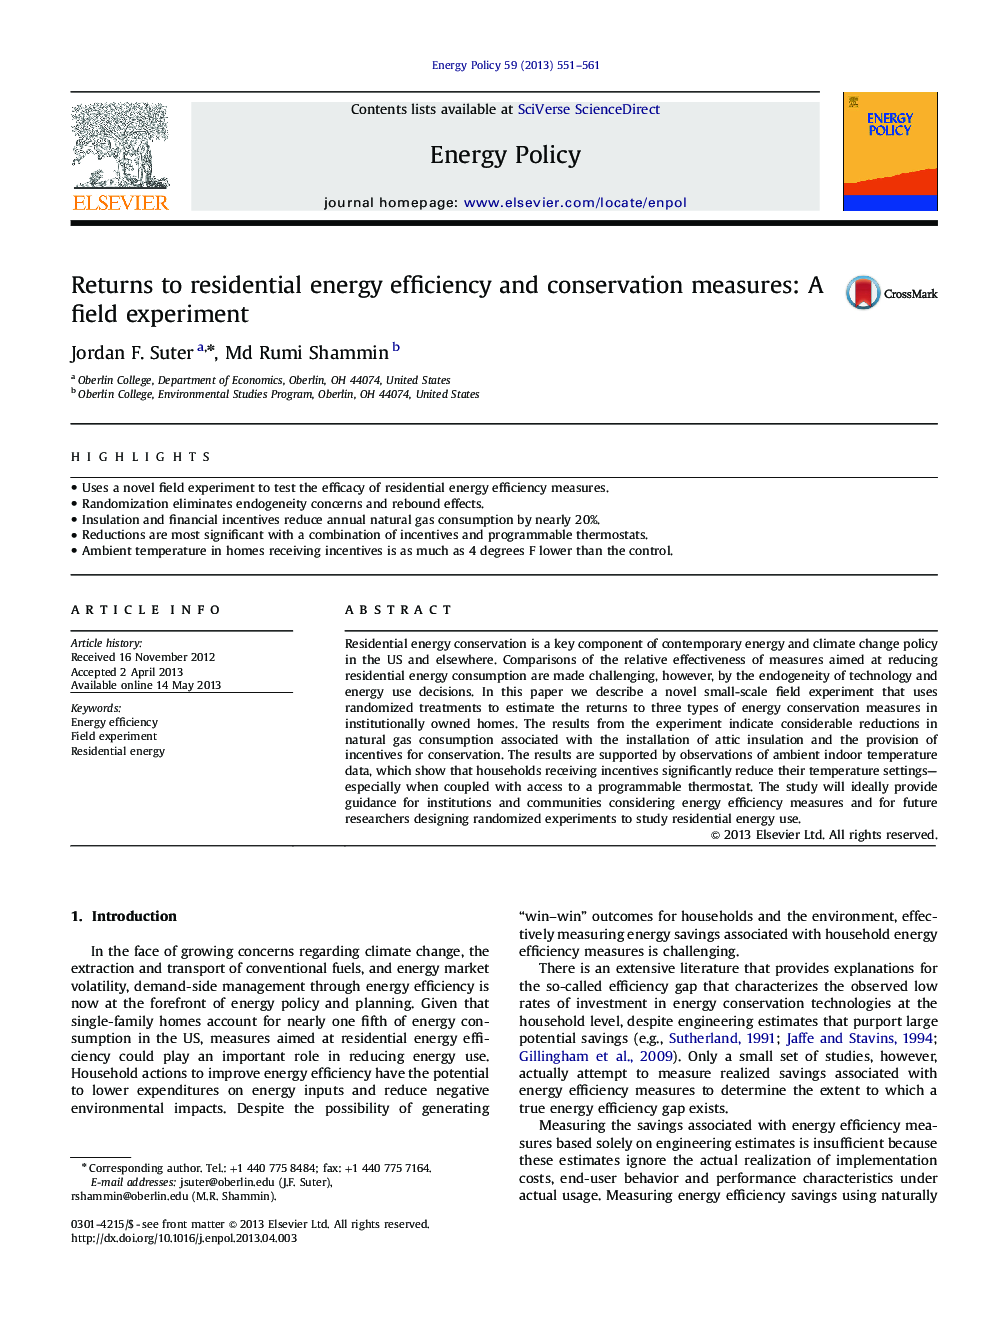 Returns to residential energy efficiency and conservation measures: A field experiment